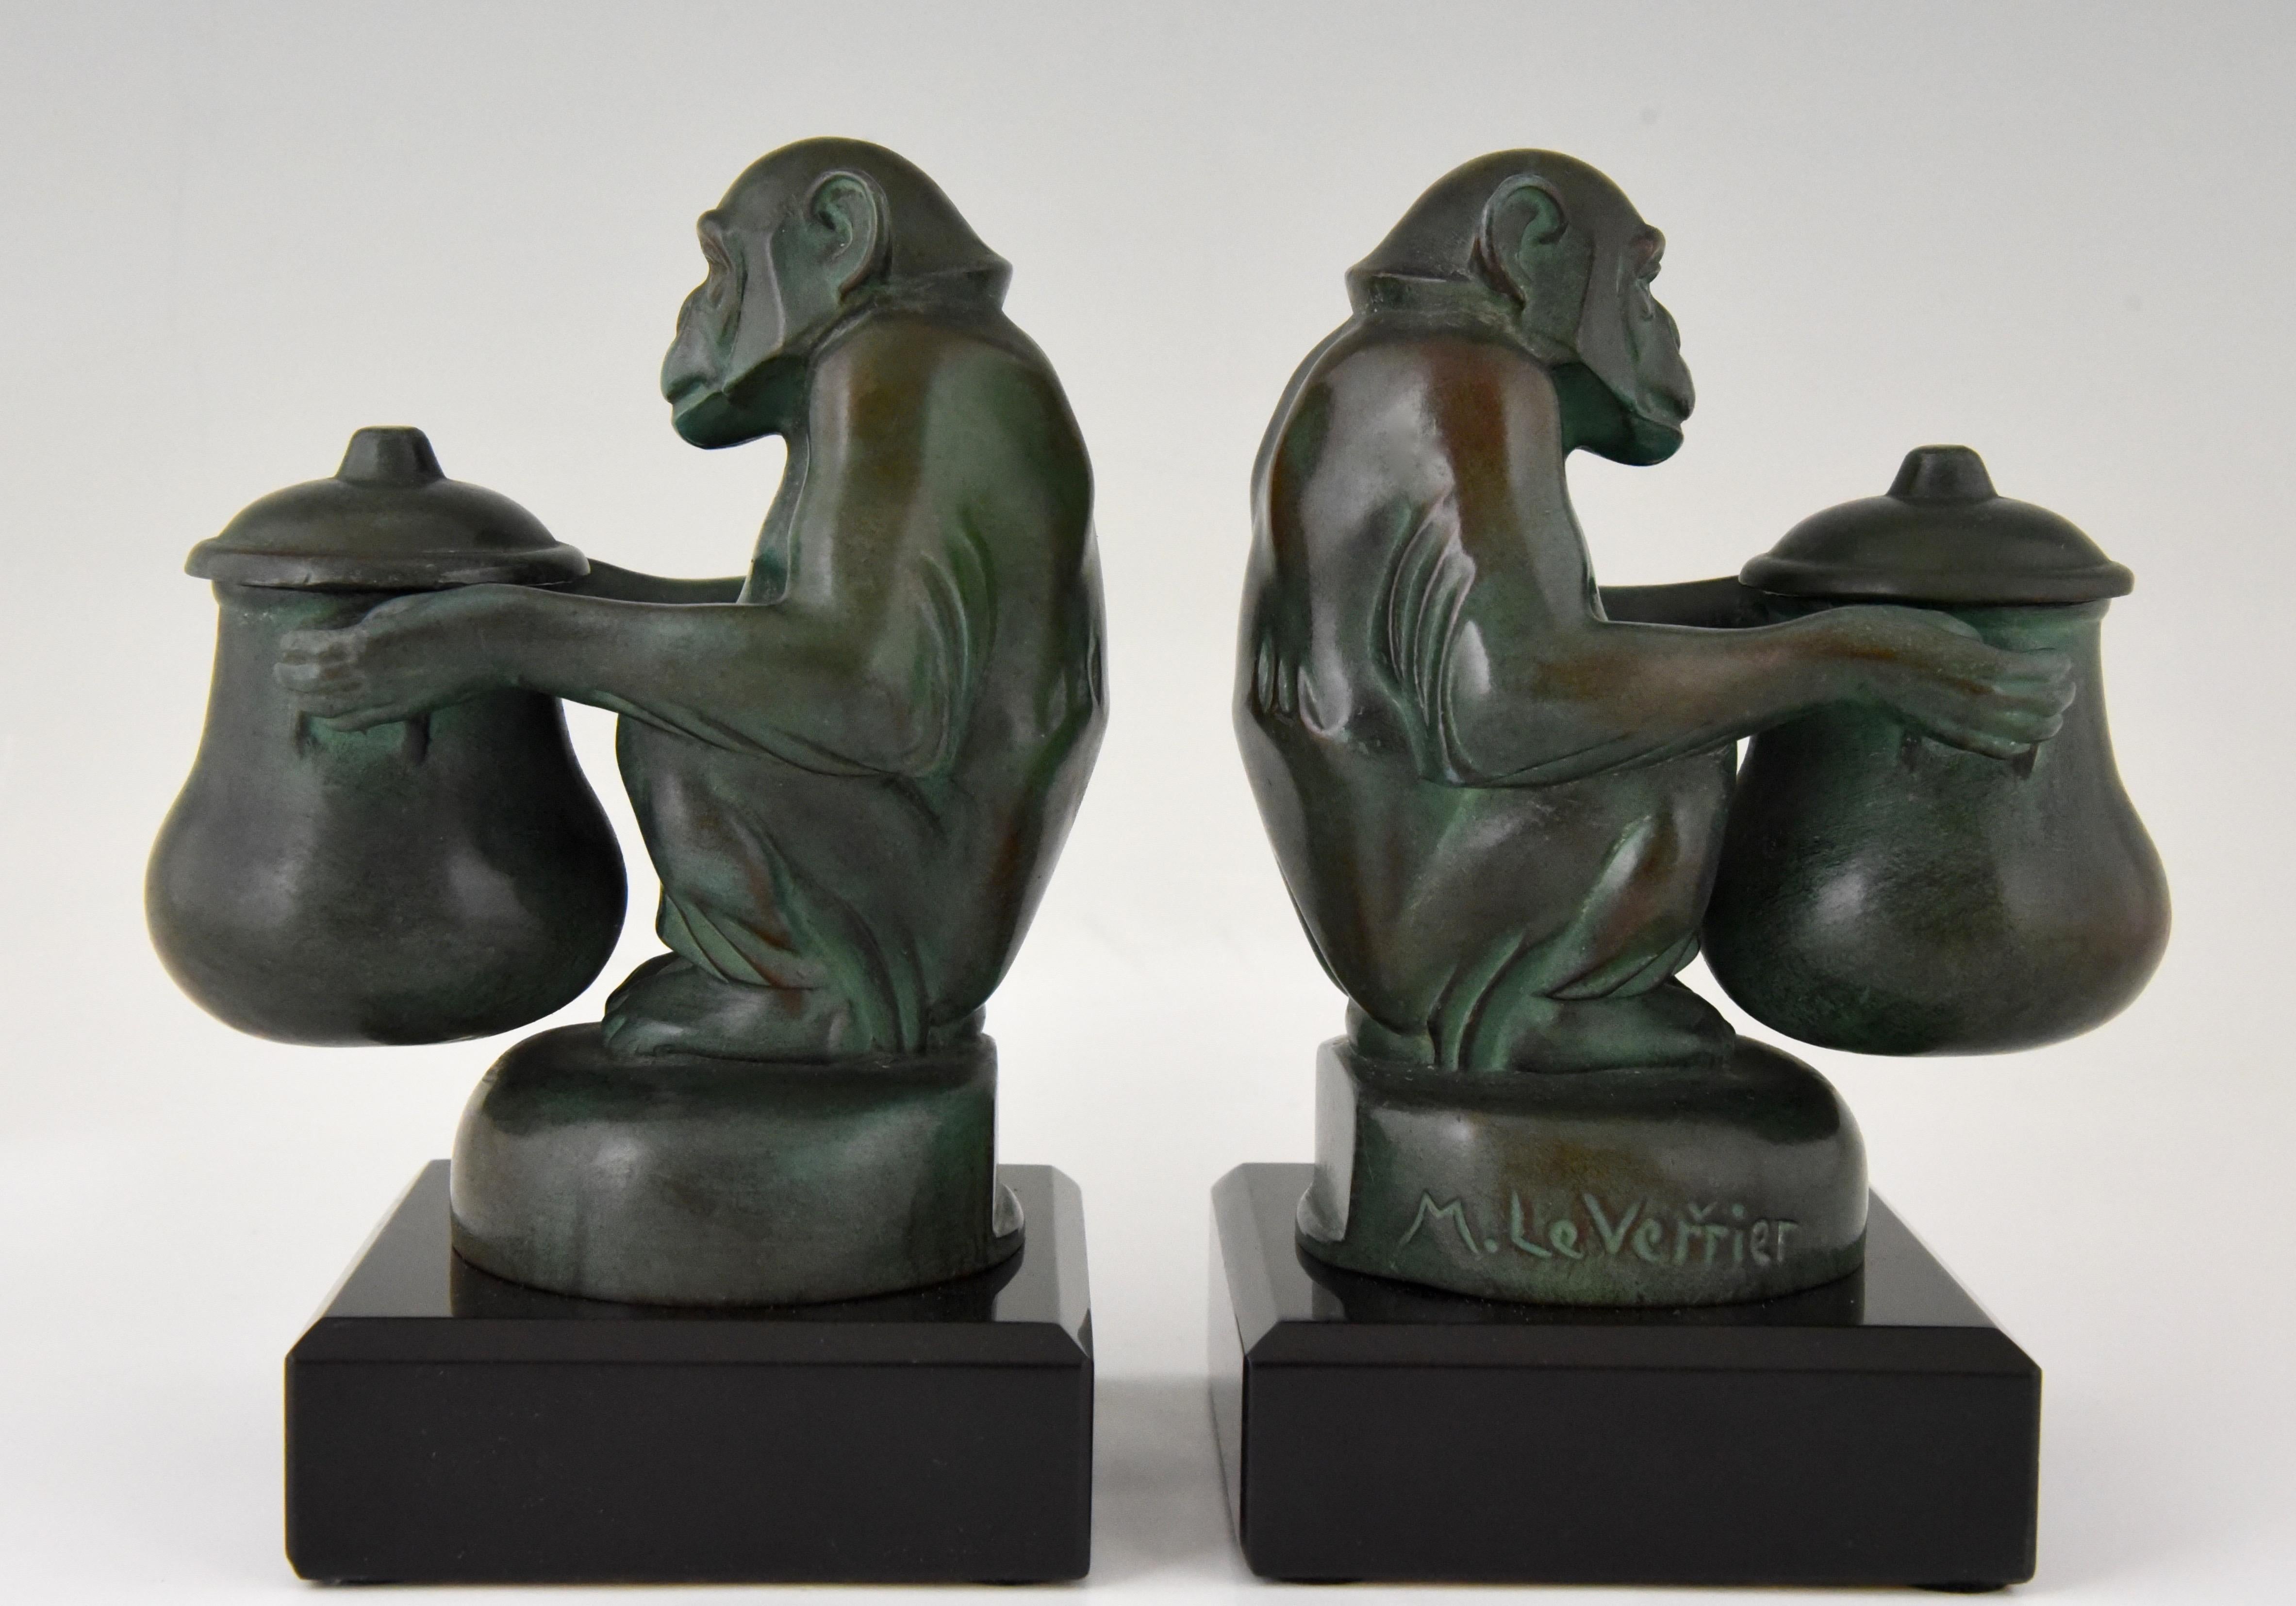 A nice pair of Art Deco monkey bookends by the famous French artist Max Le Verrier. 
Each monkey is holding an inkwell in the shape of a jar. 
The sculptures are mounted on marble bases and are signed by the artist, circa 1930. 

“Art Deco